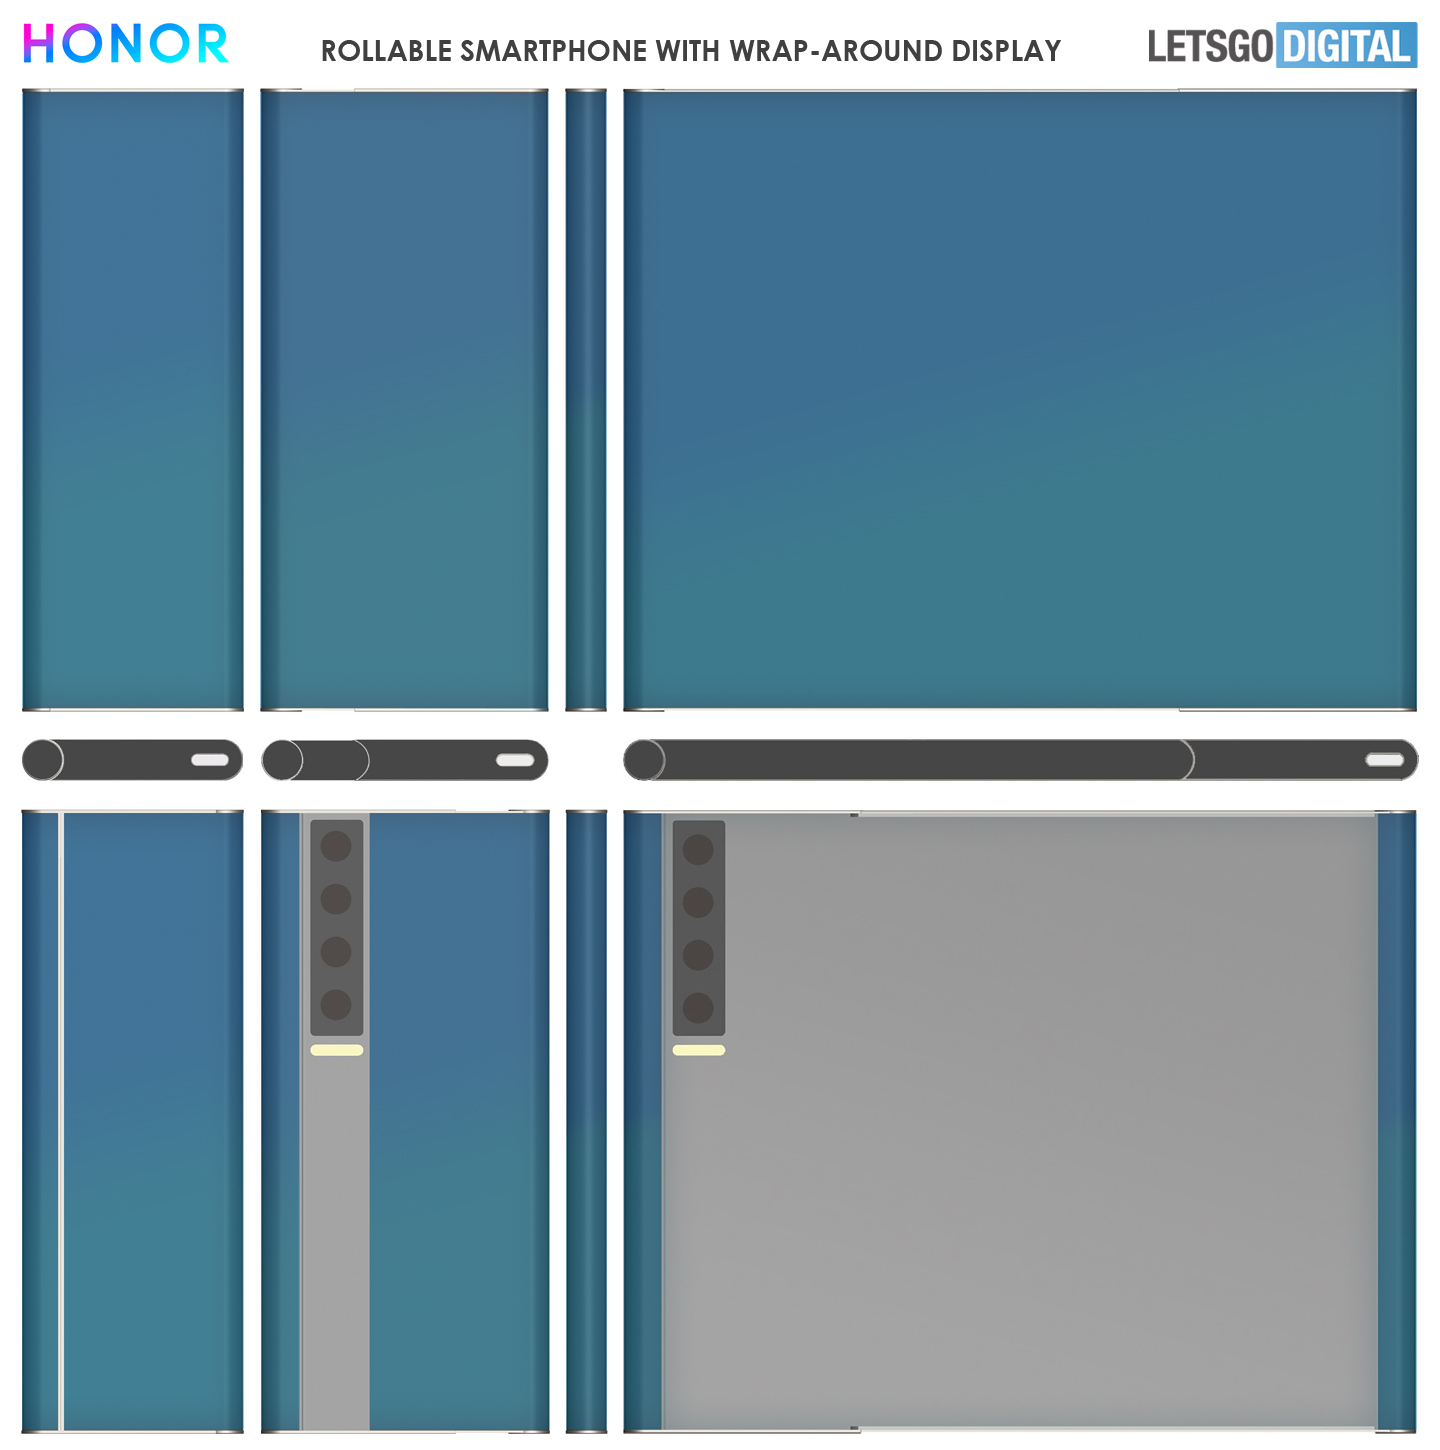 Honor Rollable Smartphone with Wrap-around Display